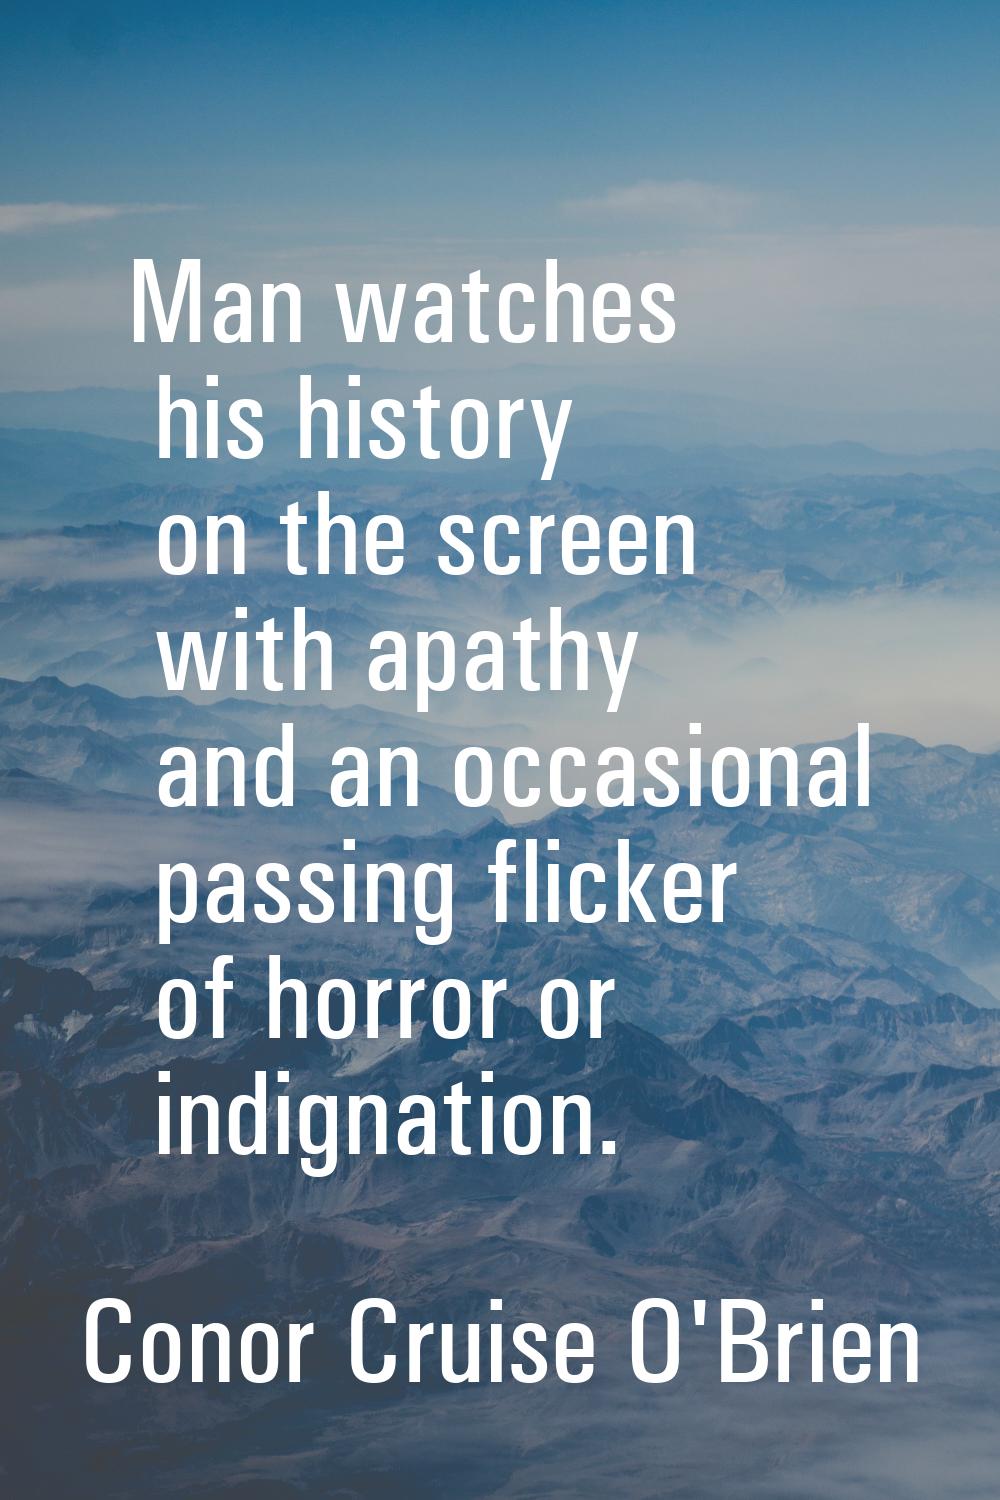 Man watches his history on the screen with apathy and an occasional passing flicker of horror or in